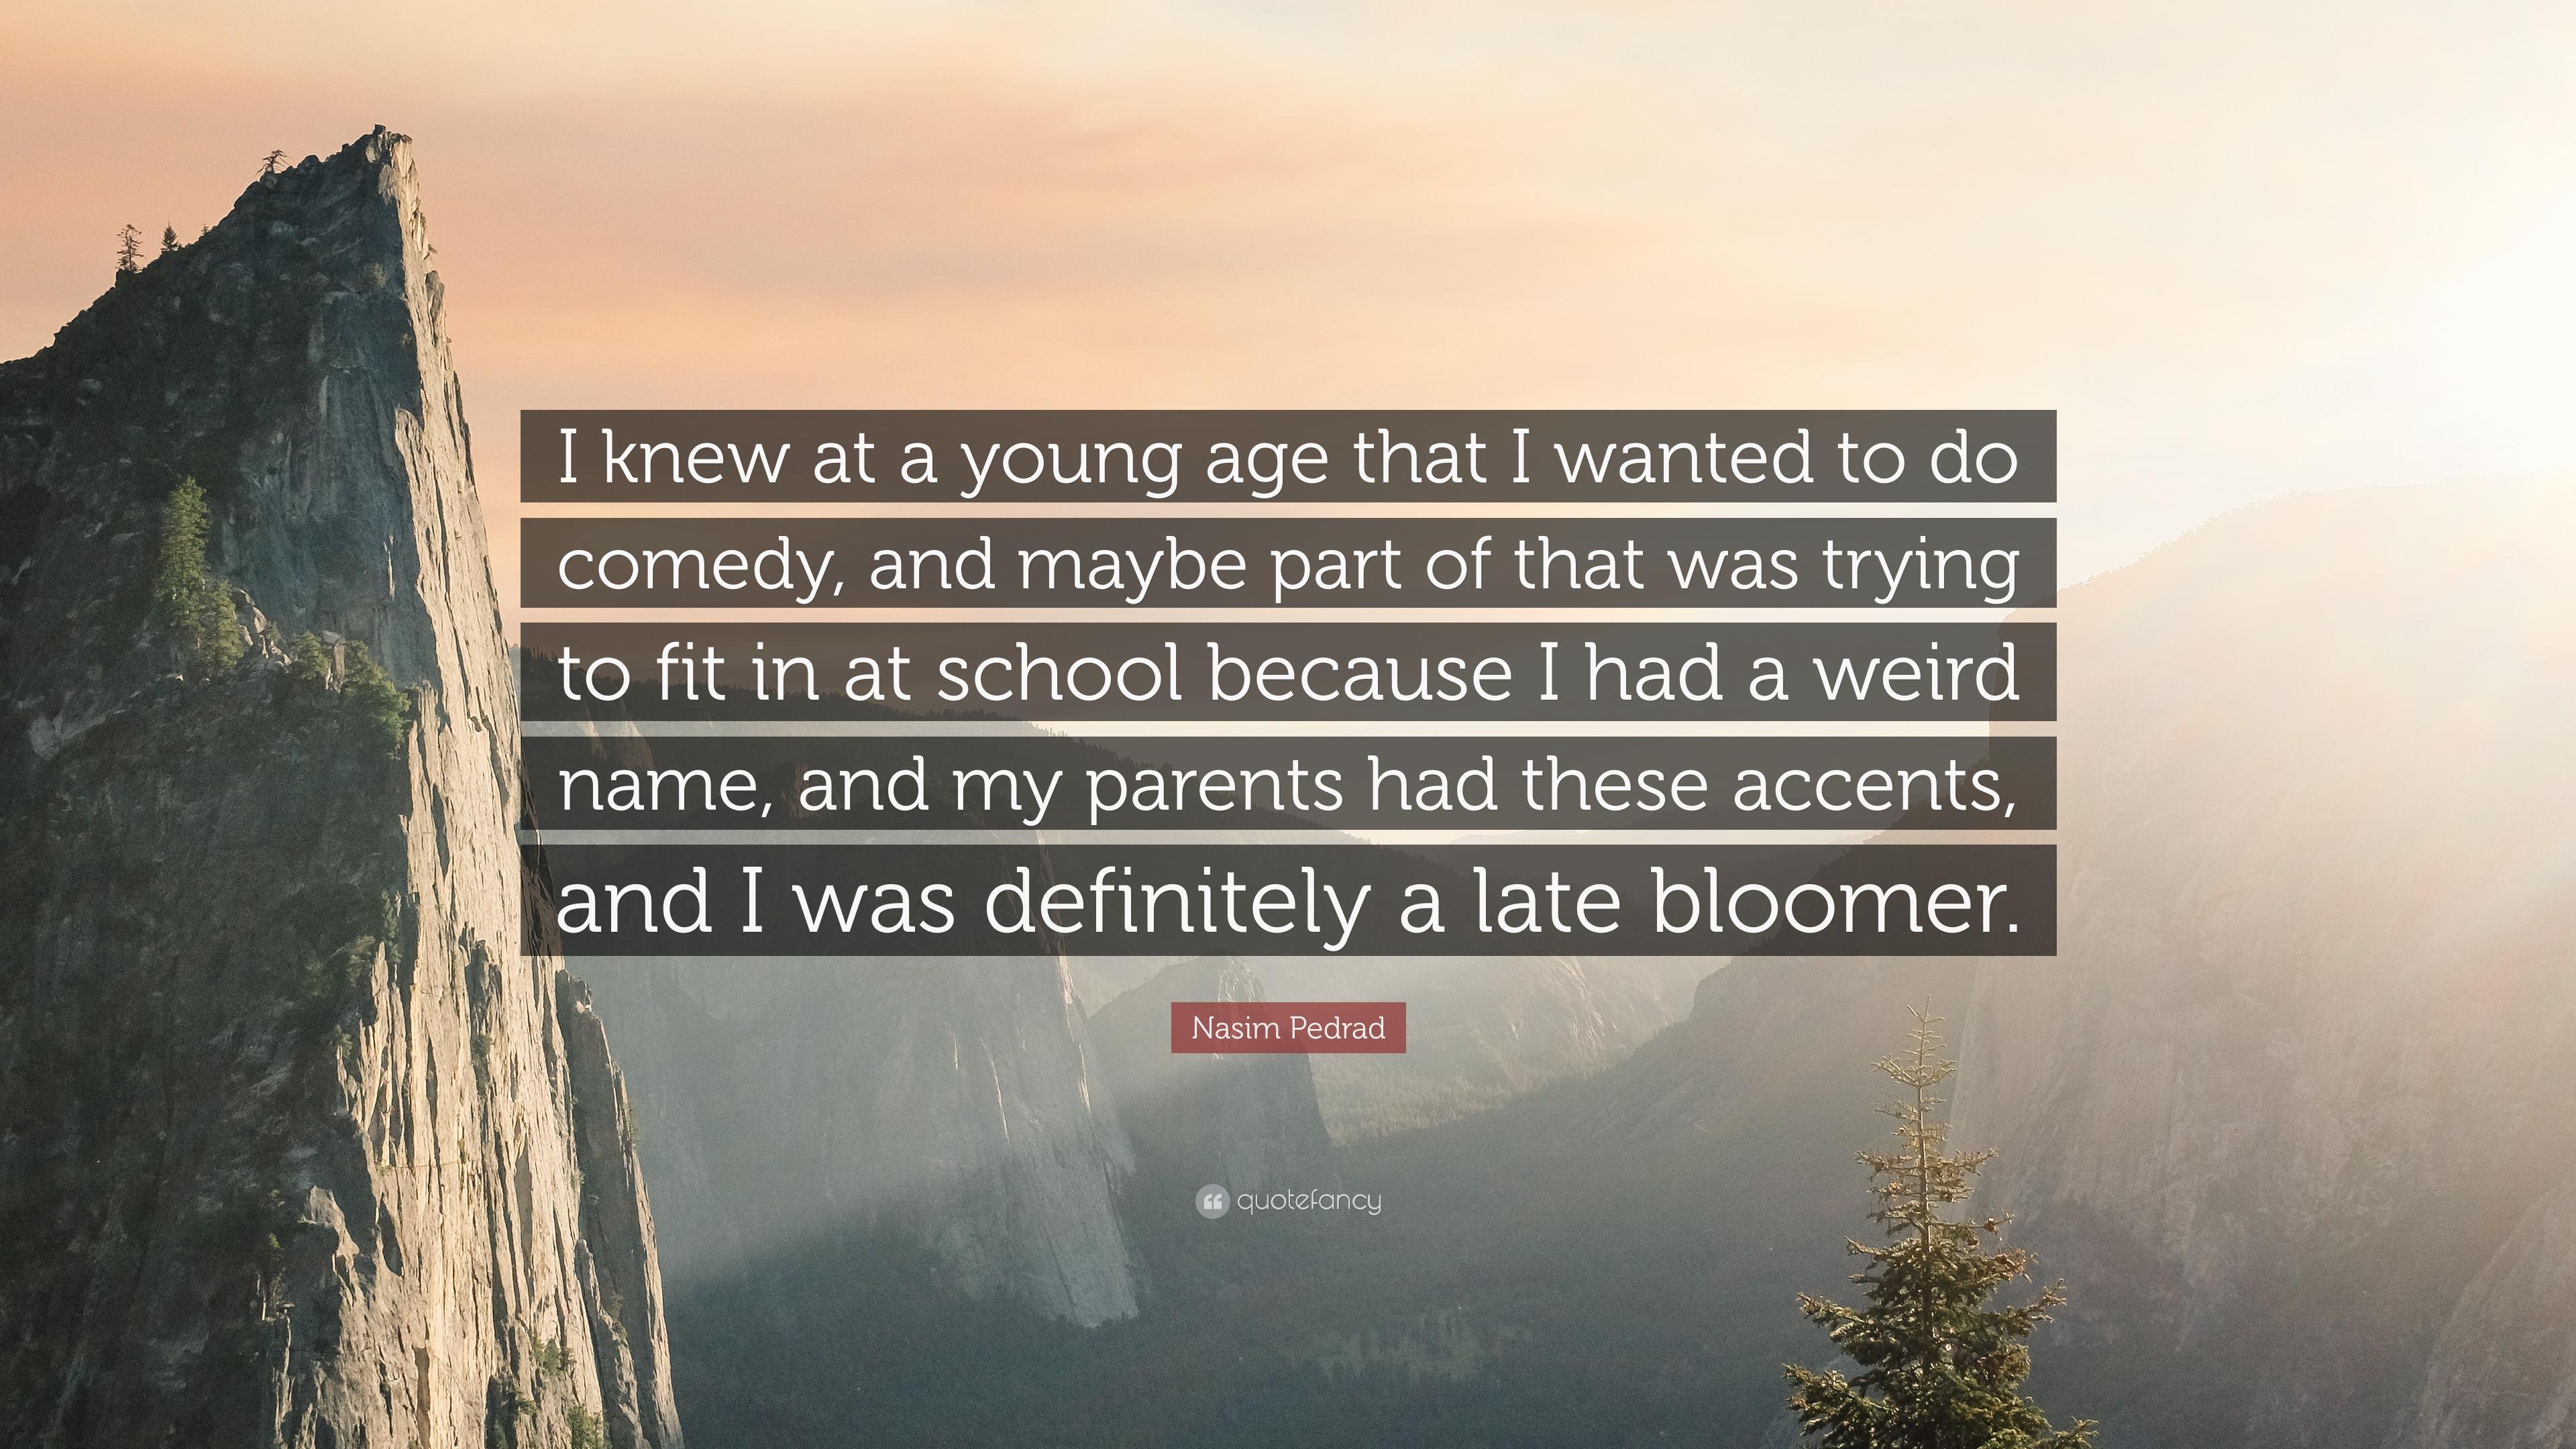 Nasim Pedrad Quote: “I knew at a young age that I wanted to do